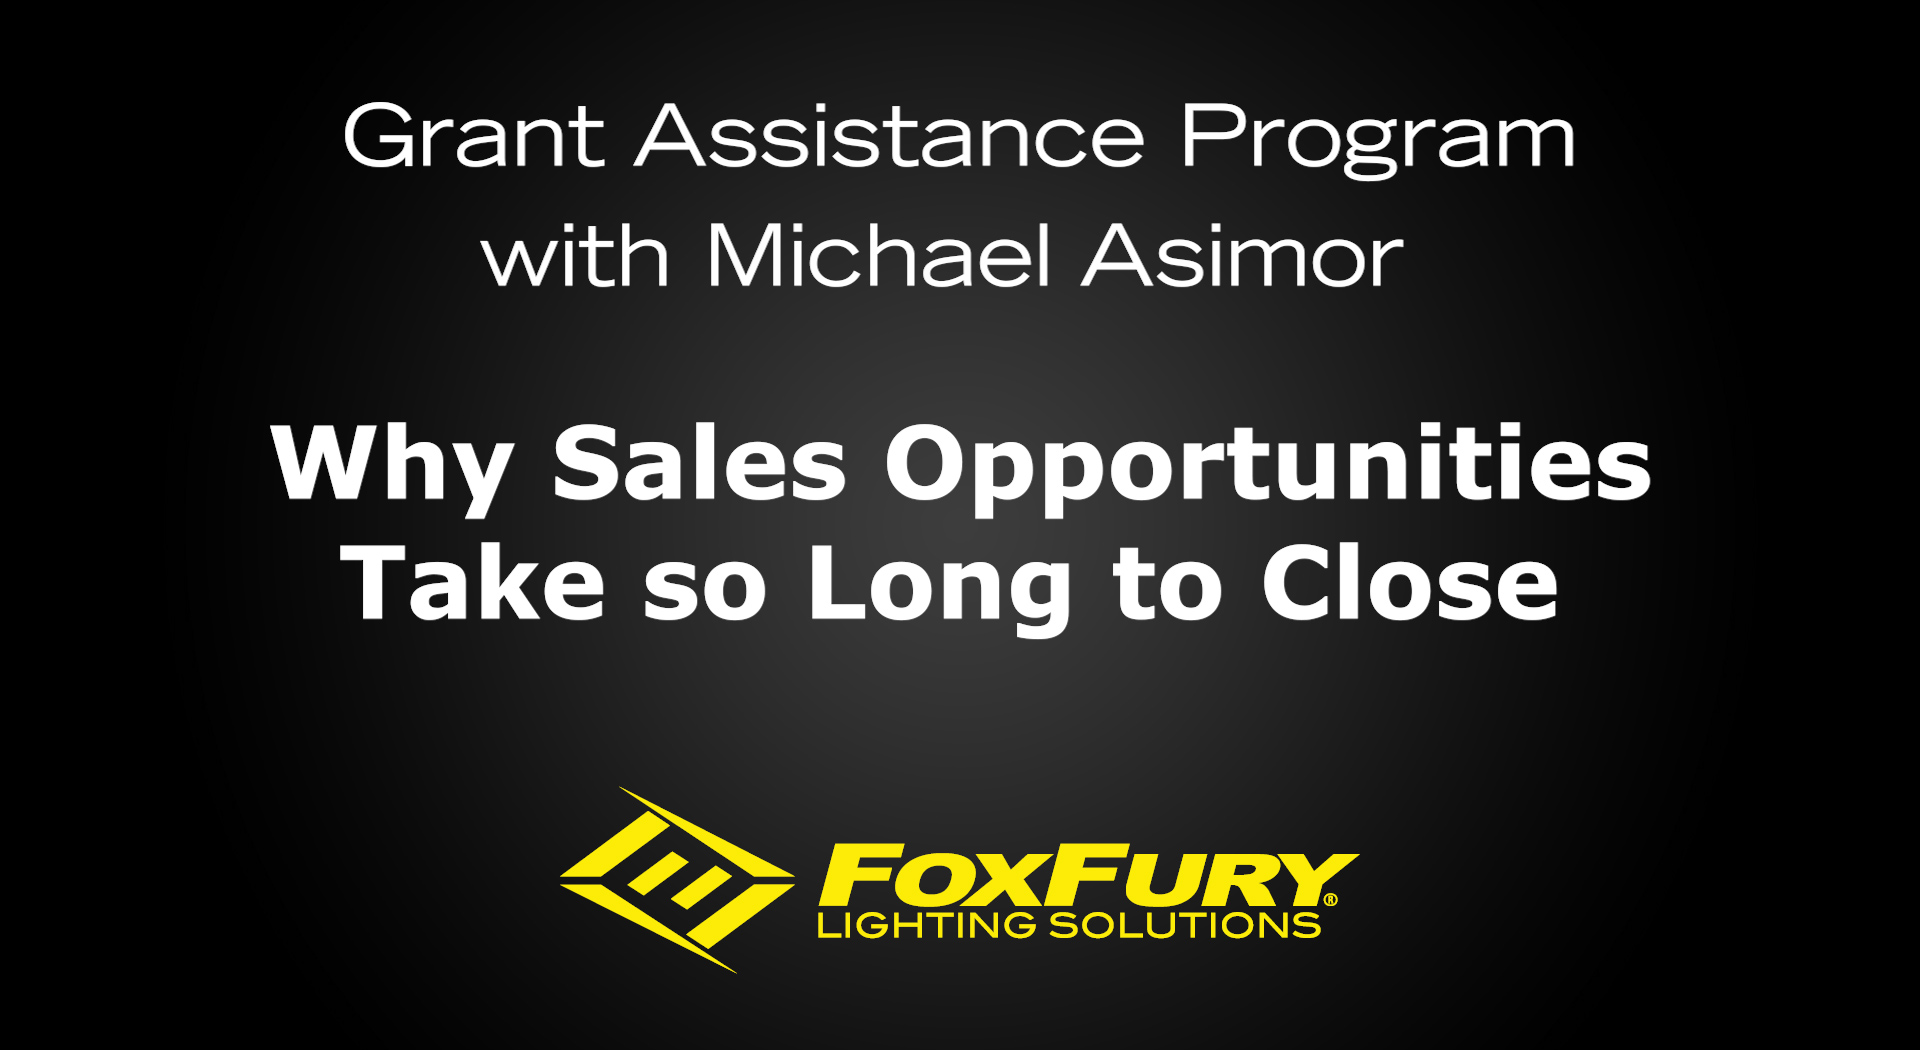 Why Sales Opportunities take so Long to Close